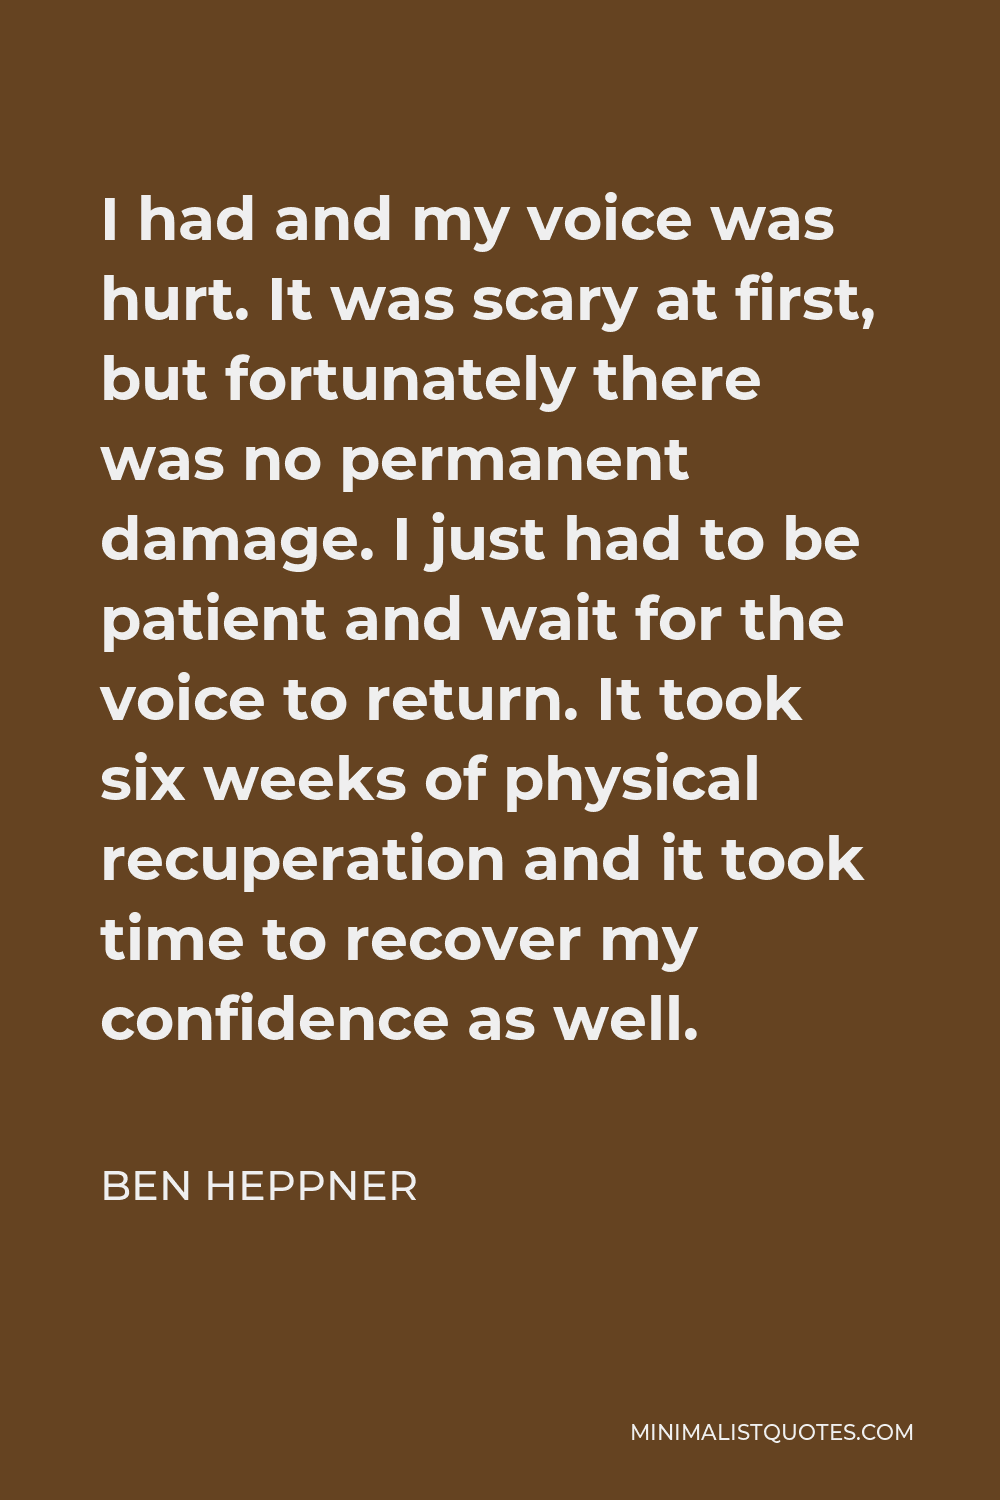 Ben Heppner Quote - I had and my voice was hurt. It was scary at first, but fortunately there was no permanent damage. I just had to be patient and wait for the voice to return. It took six weeks of physical recuperation and it took time to recover my confidence as well.